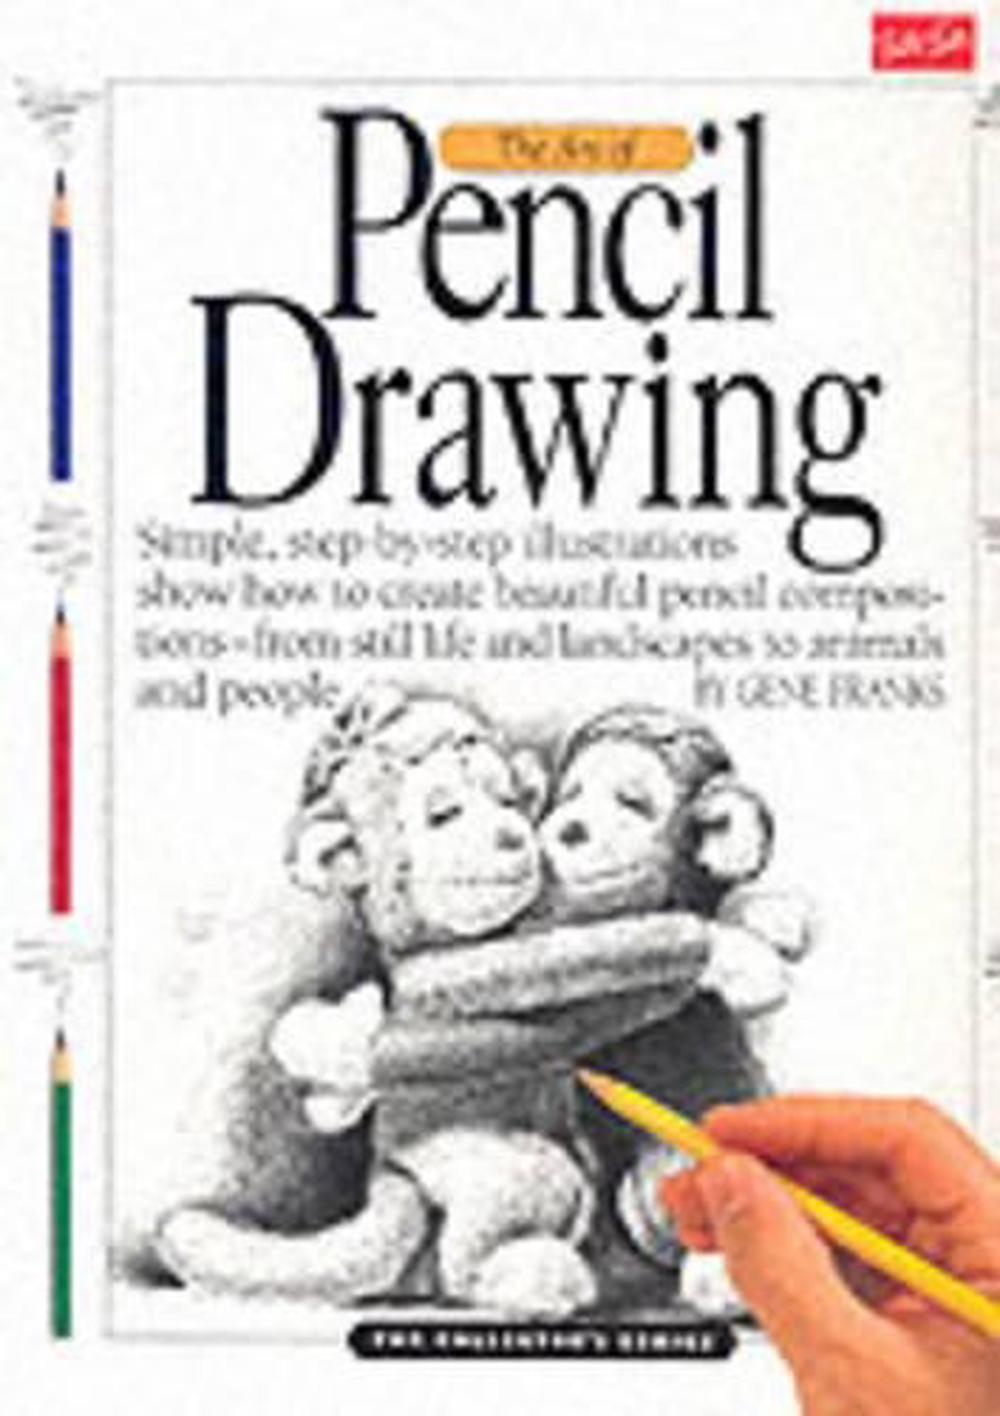 The Art of Pencil Drawing by Gene Franks, Paperback, 9781560101864